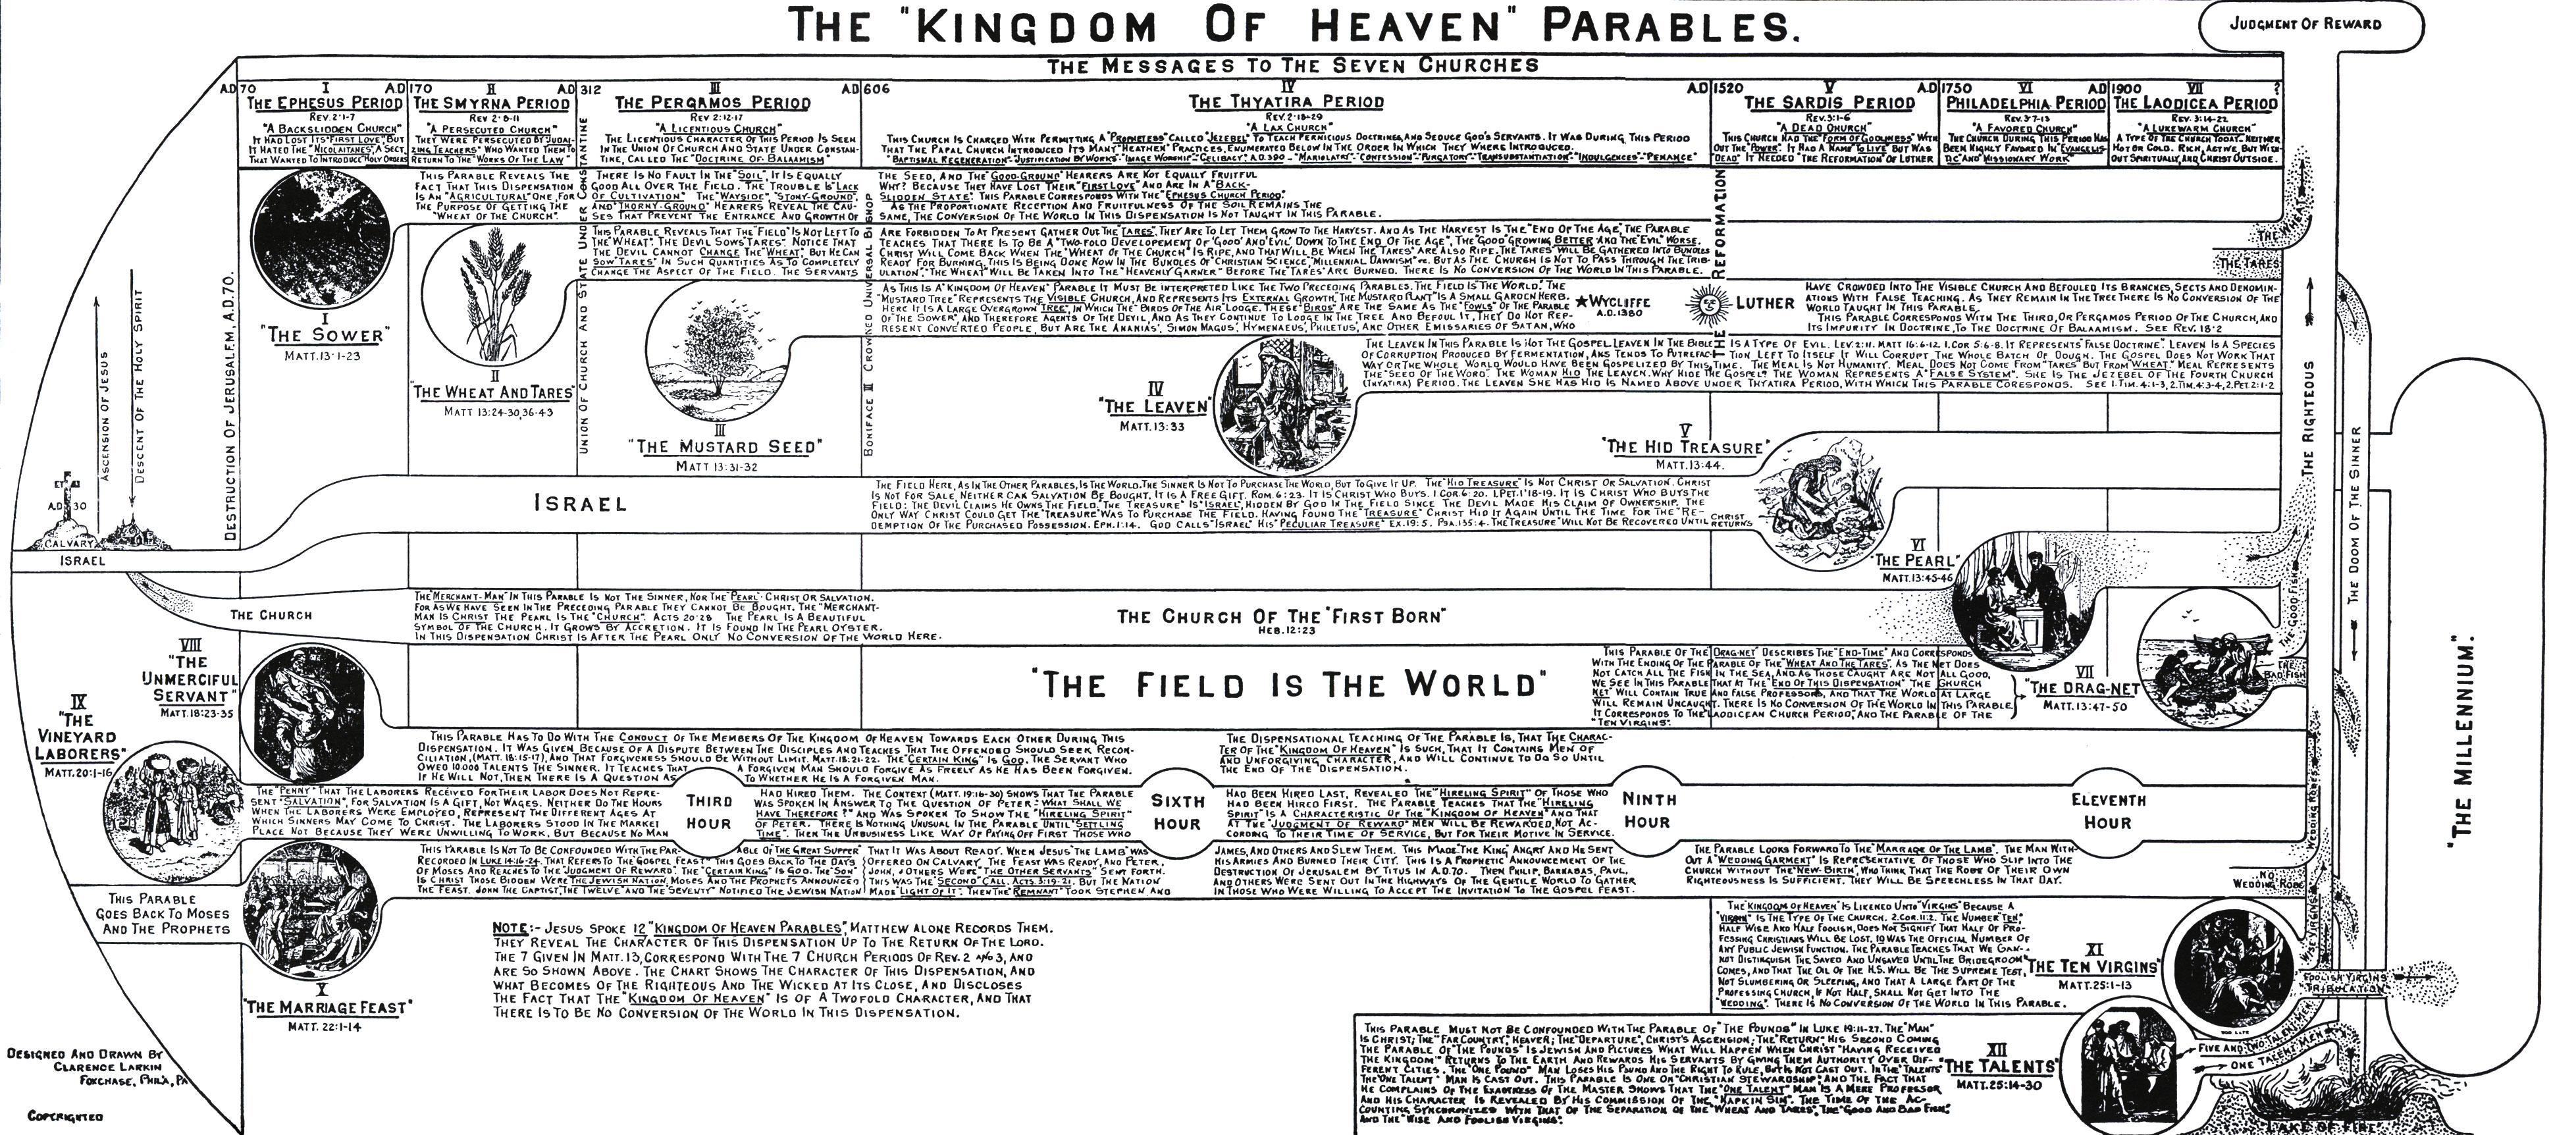 The 'Kingdom of Heaven' Parables Illustration by Clarence Larkin